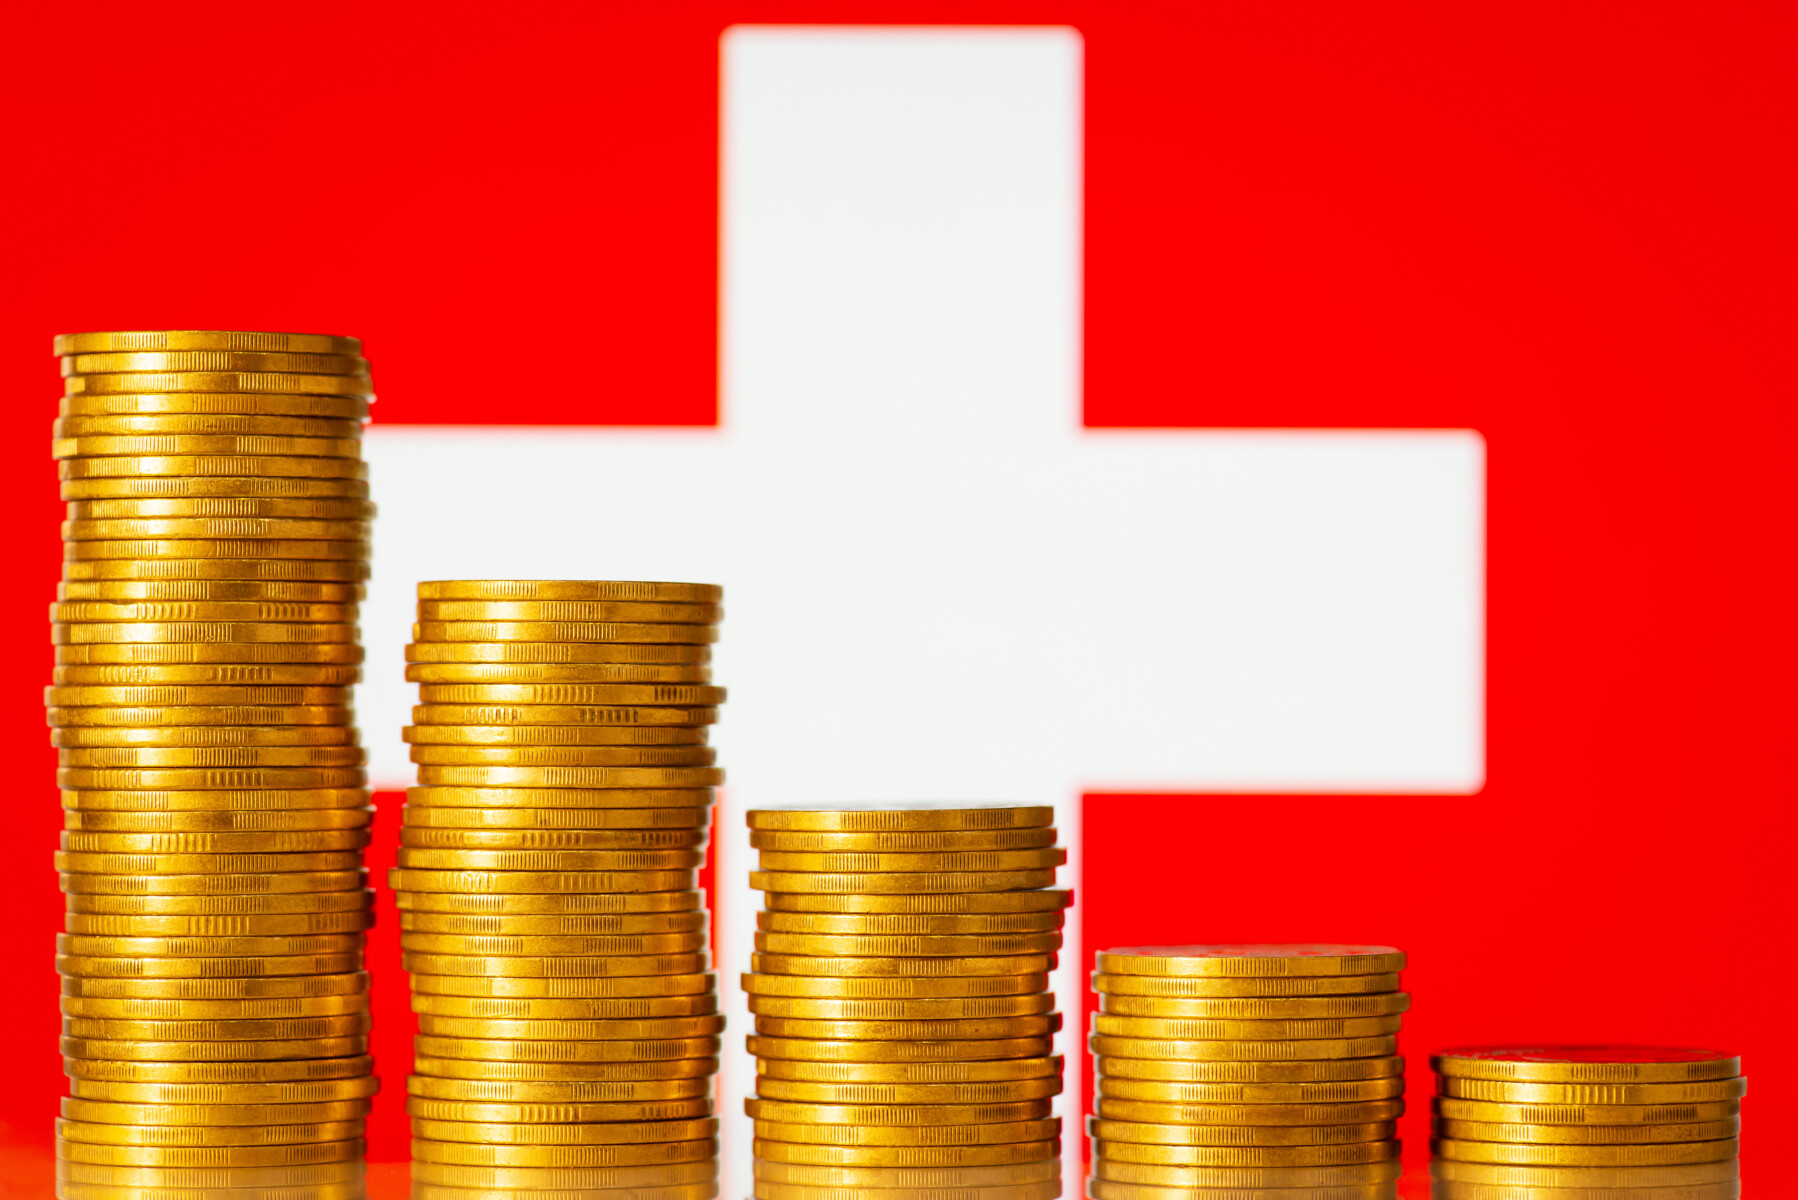 Problems in economy of Switzerland concept. Downcomming graph made of gold coins stacks with flag of Switzerland on the background